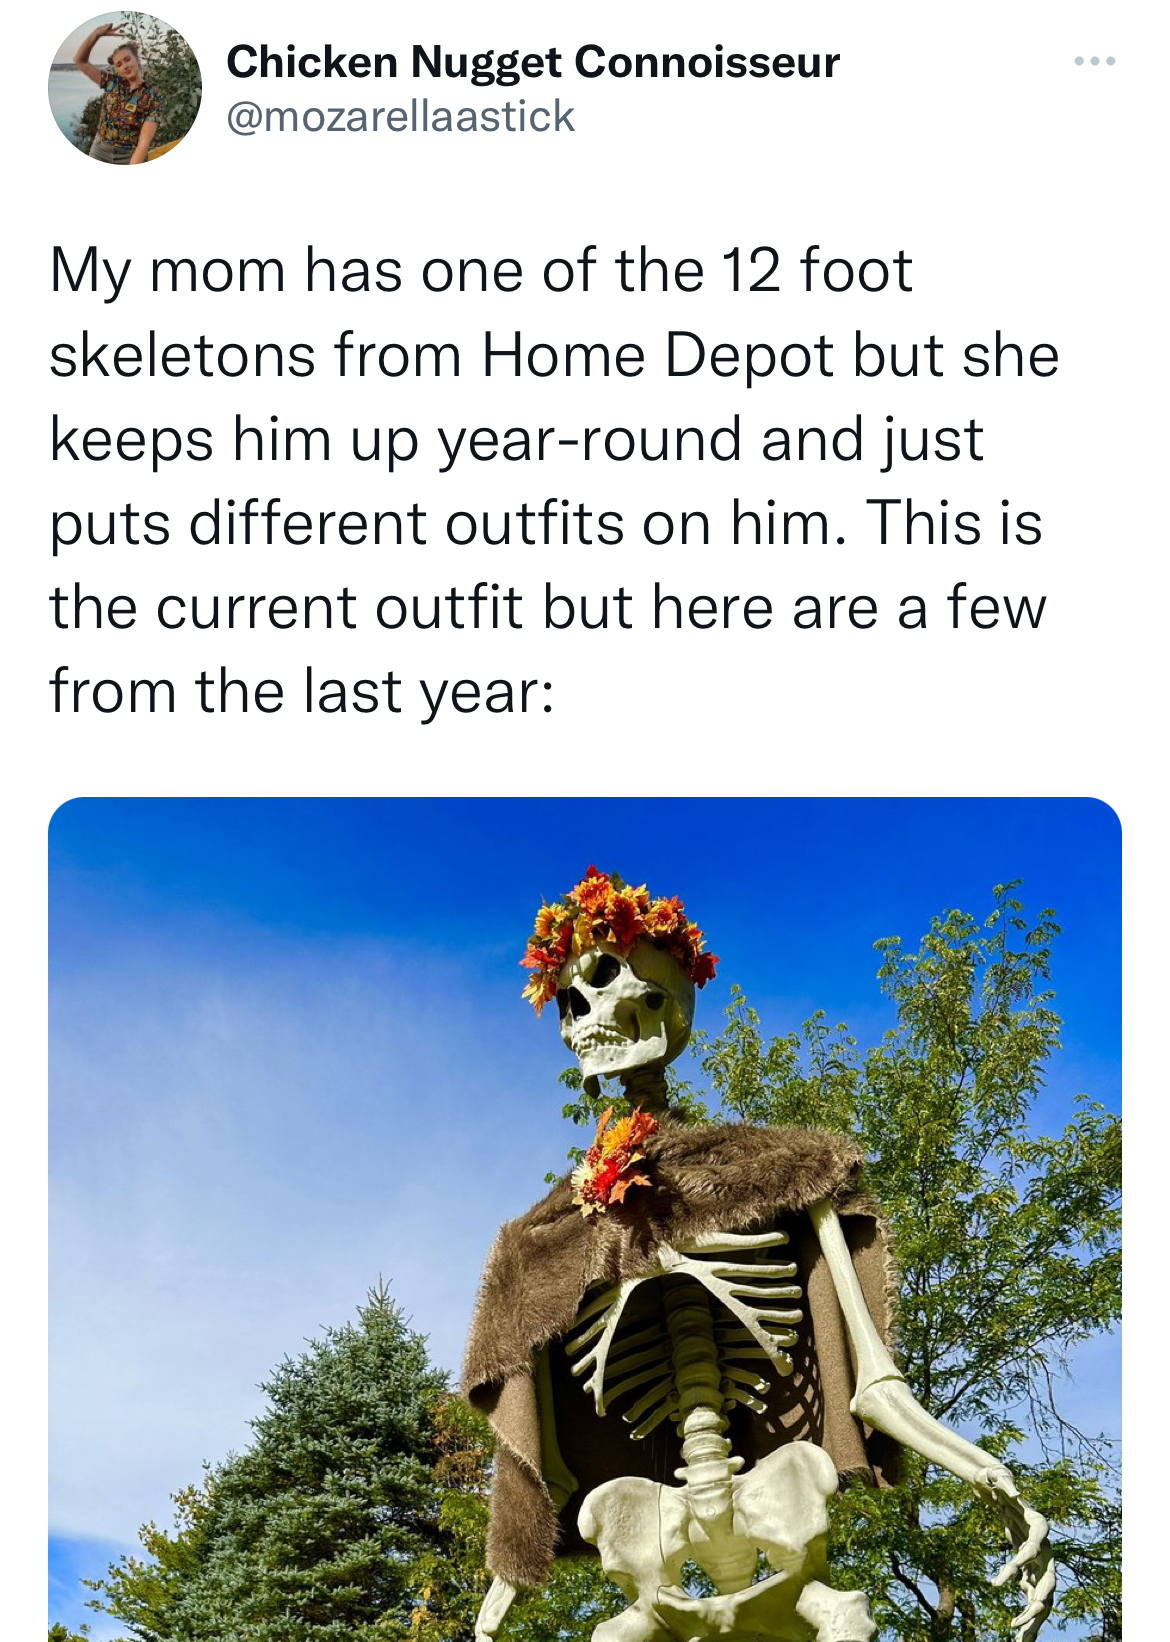 Savage and funny tweets - tree - Chicken Nugget Connoisseur My mom has one of the 12 foot skeletons from Home Depot but she keeps him up yearround and just puts different outfits on him. This is the current outfit but here are a few from the last year